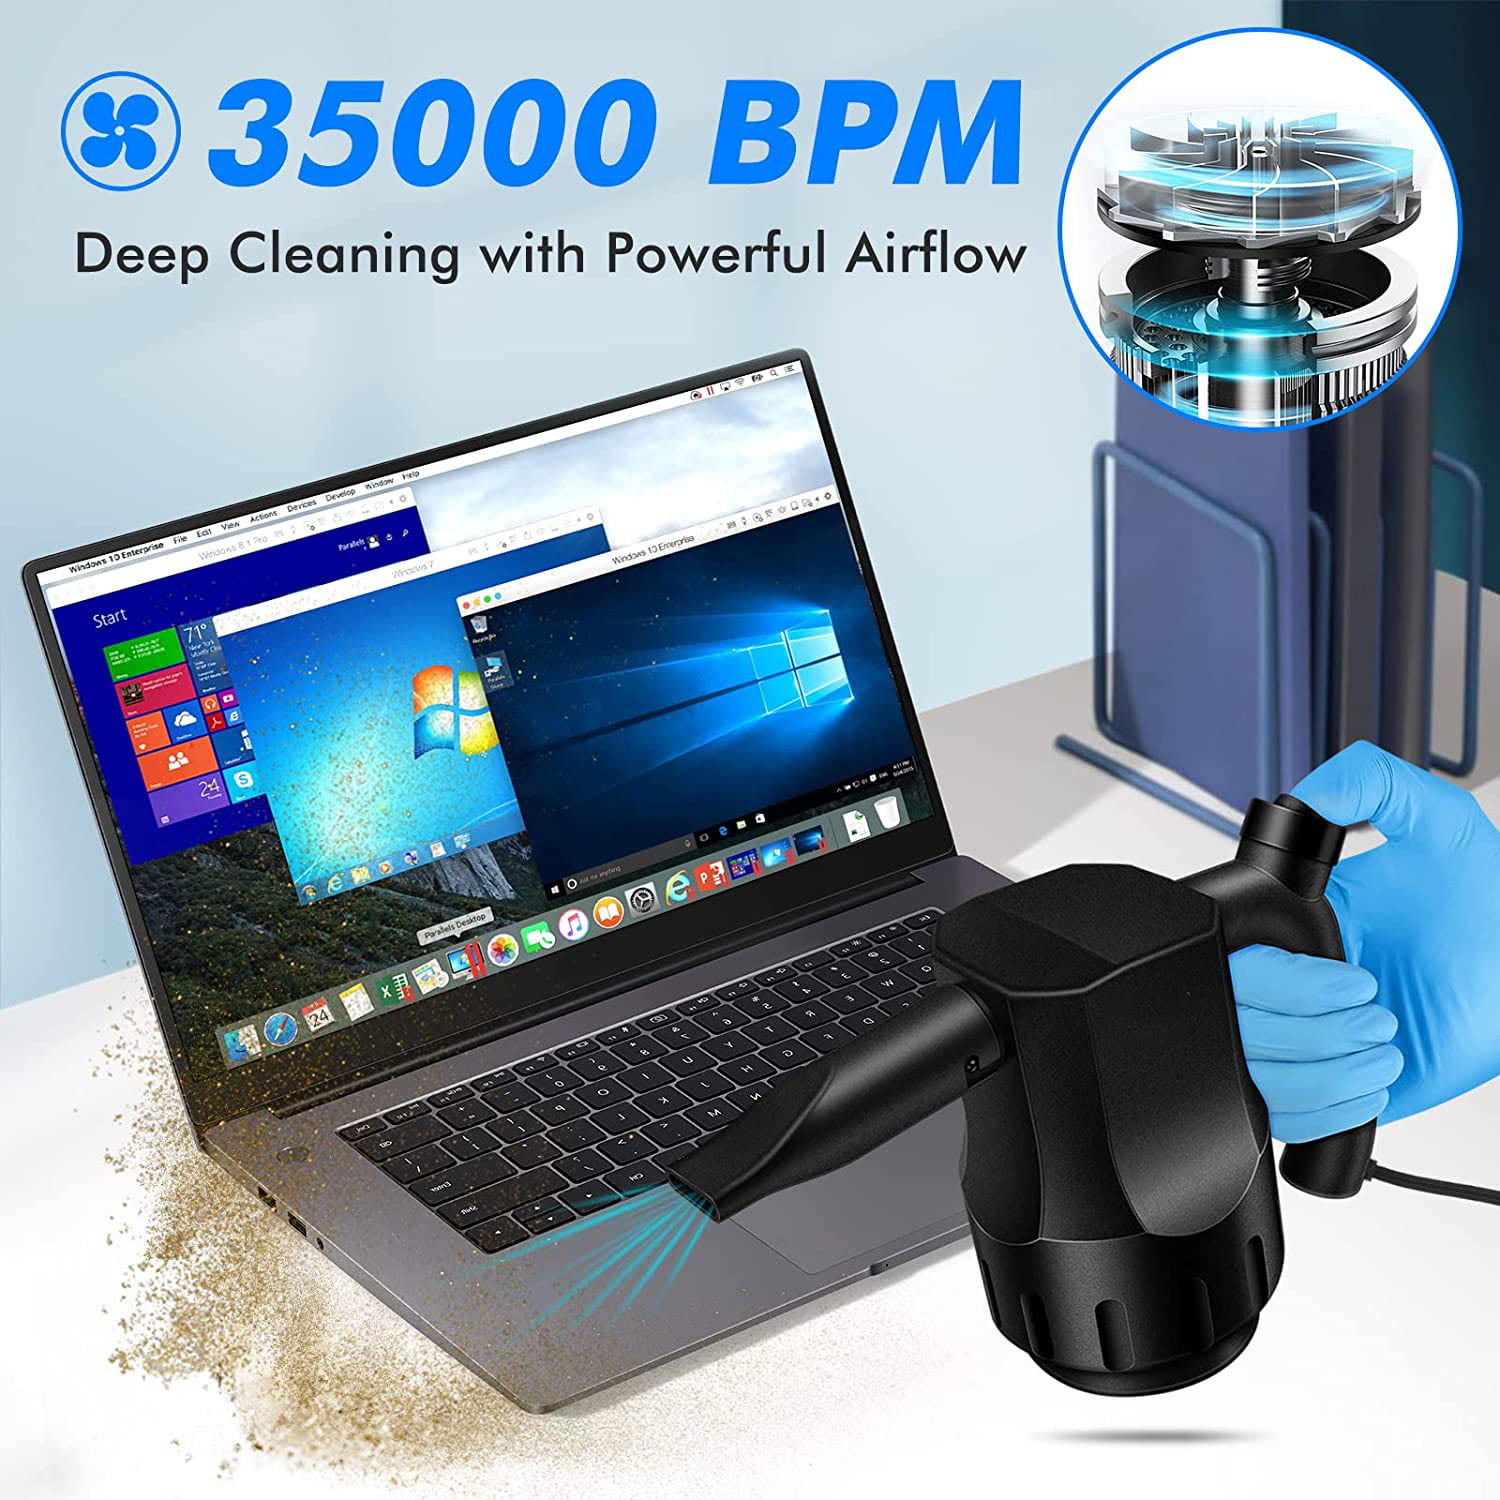 Super Power Electric Air Duster Dust Blower Computer Duster Canned Air Replaces for Cleaning Dust Hairs Crumbs Scraps for Computer Laptop Keyboard Electronics Compressed Air 